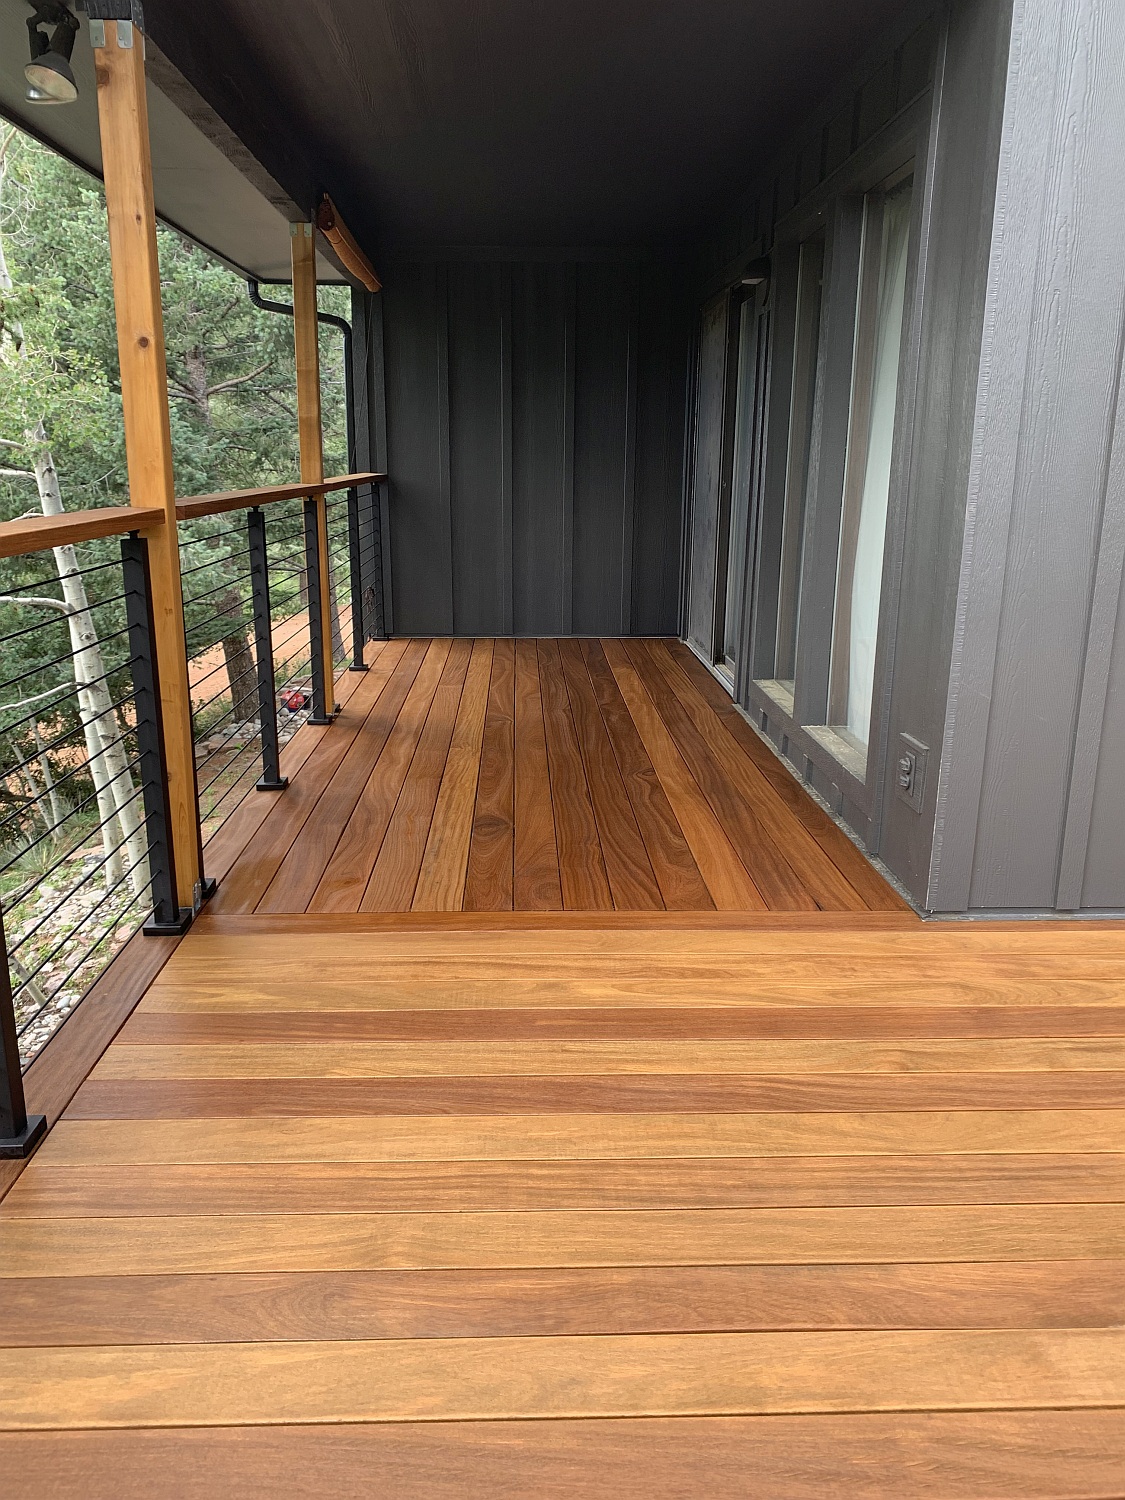 Gorgeous Cumaru hardwood deck stained with Ipe oil gives the wood a warm depth